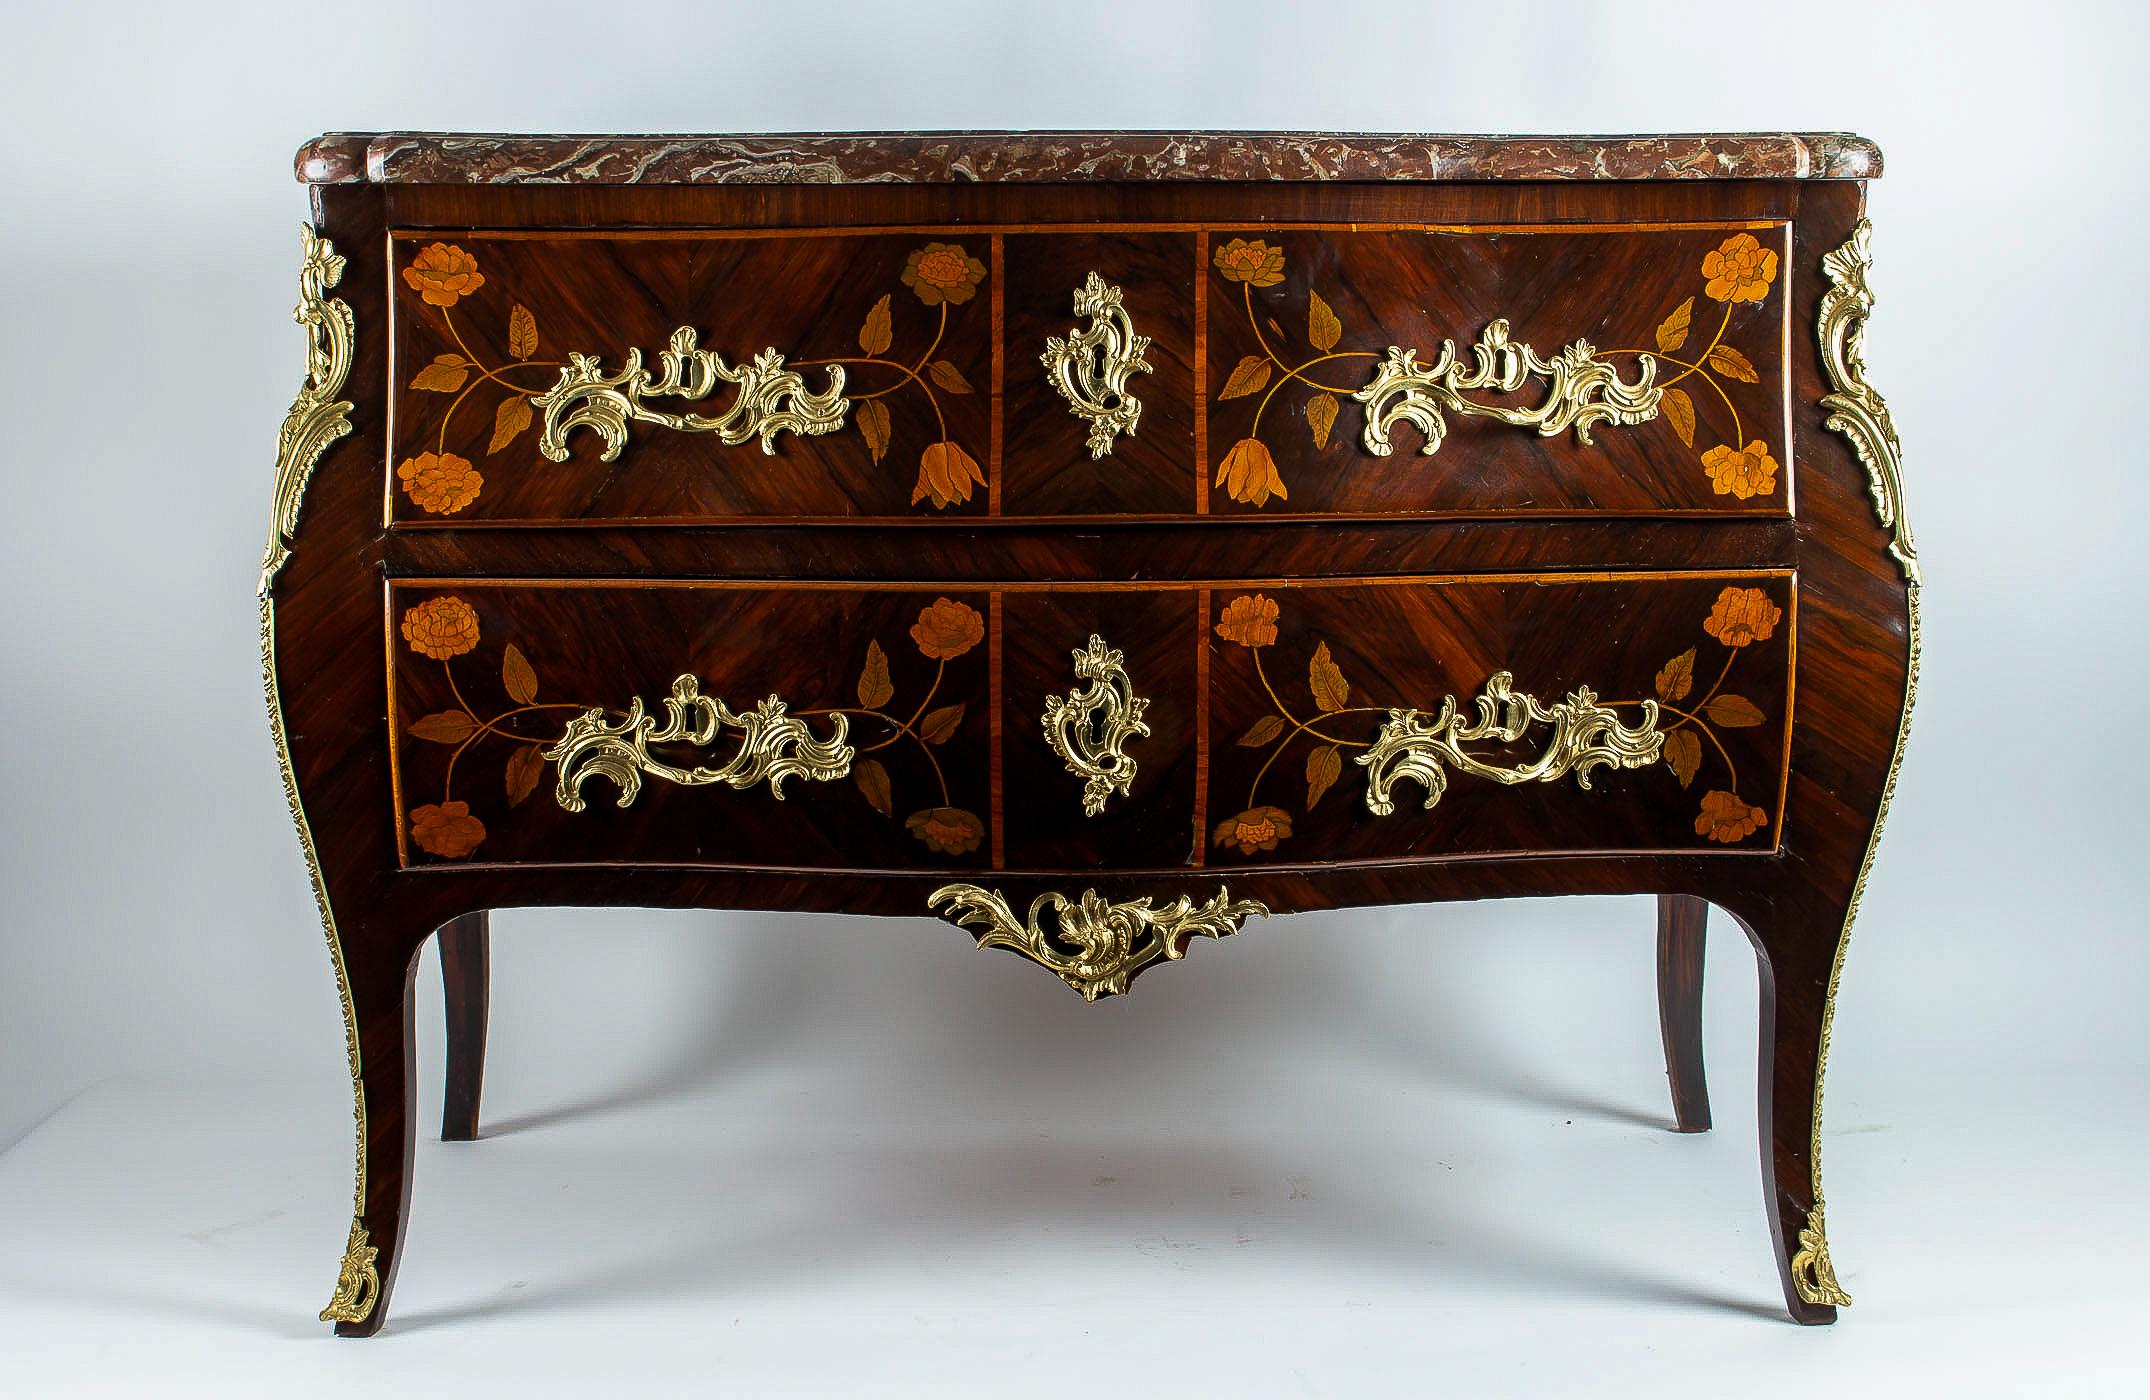 French Louis XV period flowers marquetry commode circa 1740-1750

Elegant, rare and decorative serpentine commode called 